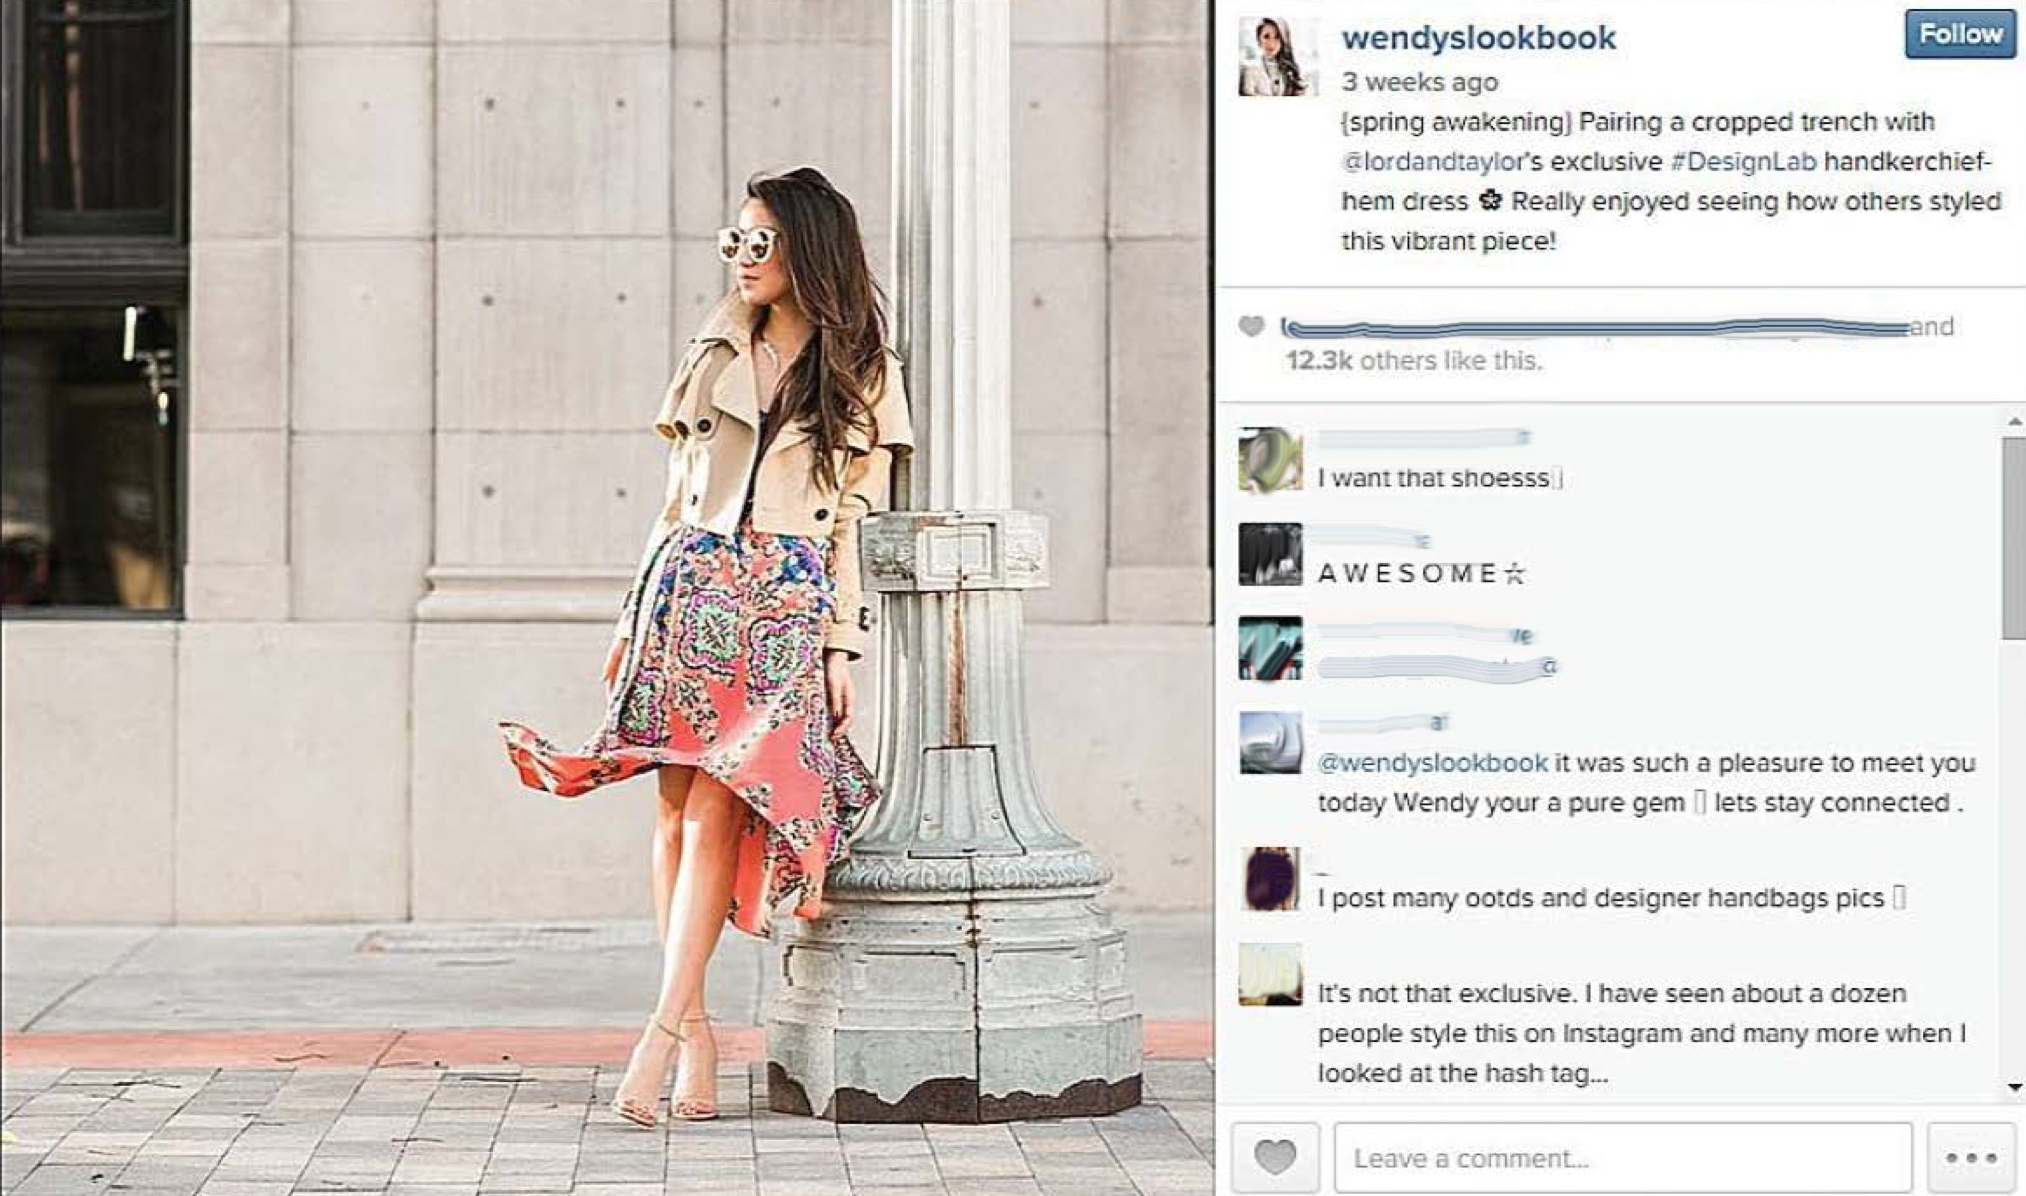 Lord & Taylor Gets Slap On Wrist For Paying Instagram “Influencers” To Run Secret Ads